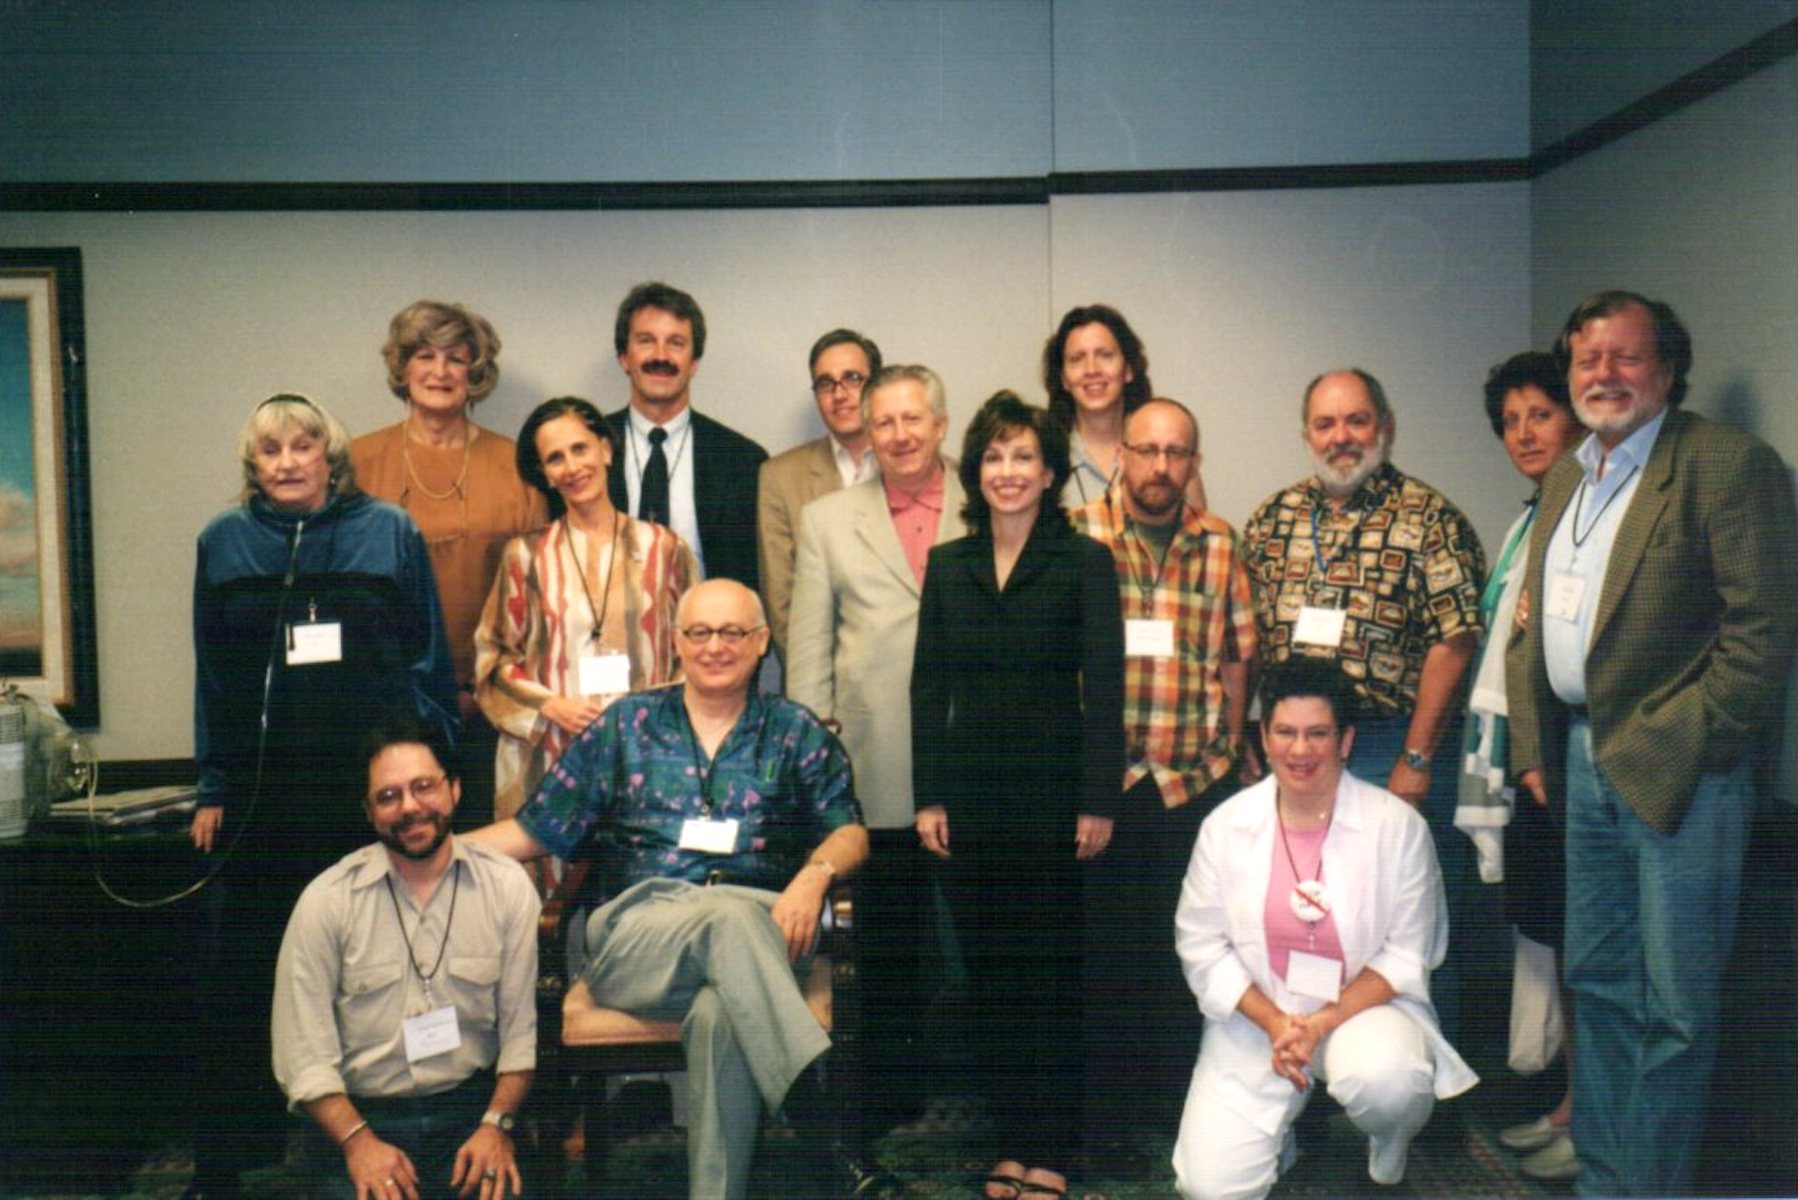 Jude Patton with WPATH [World Professional Association for Transgender Health]’s Board of Directors, 2001. Photo courtesy of Jude Patton.